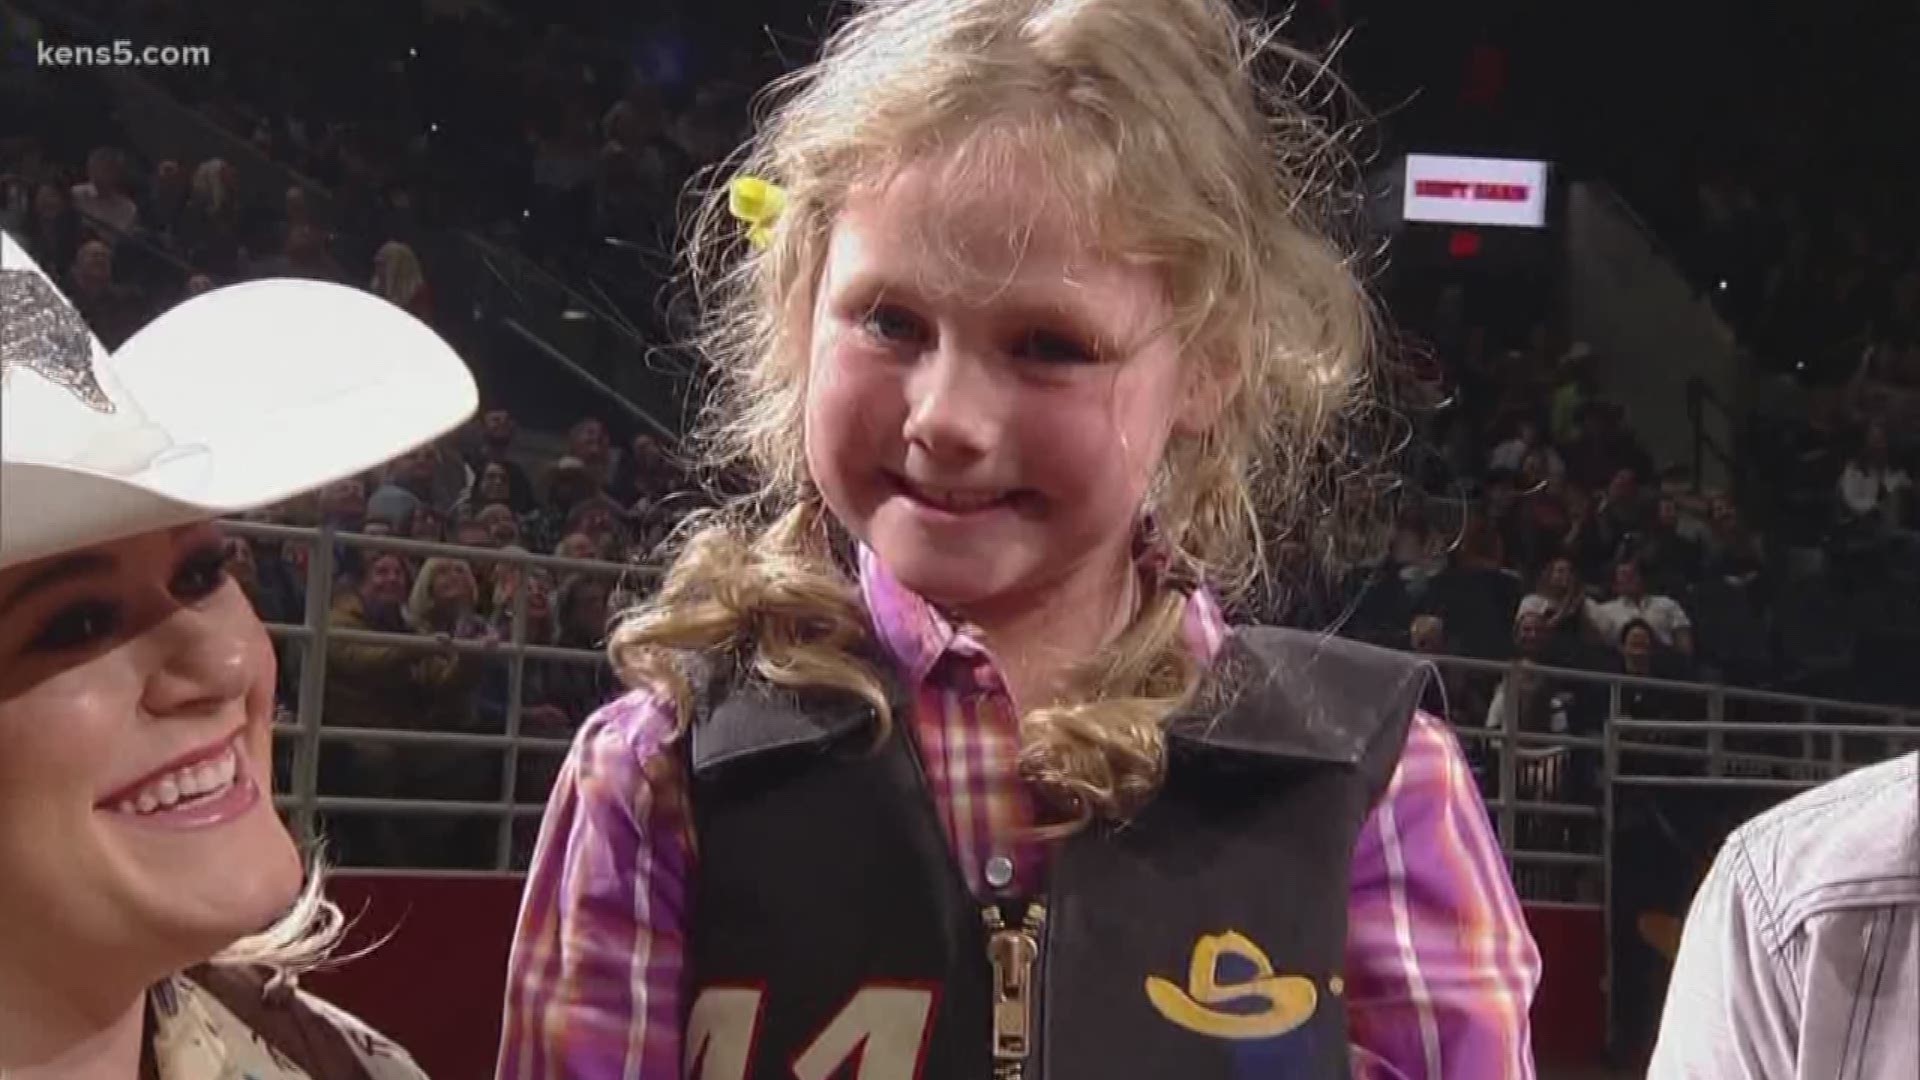 She scored a whopping 89 points on her winning run...then got straight up and busted a move!